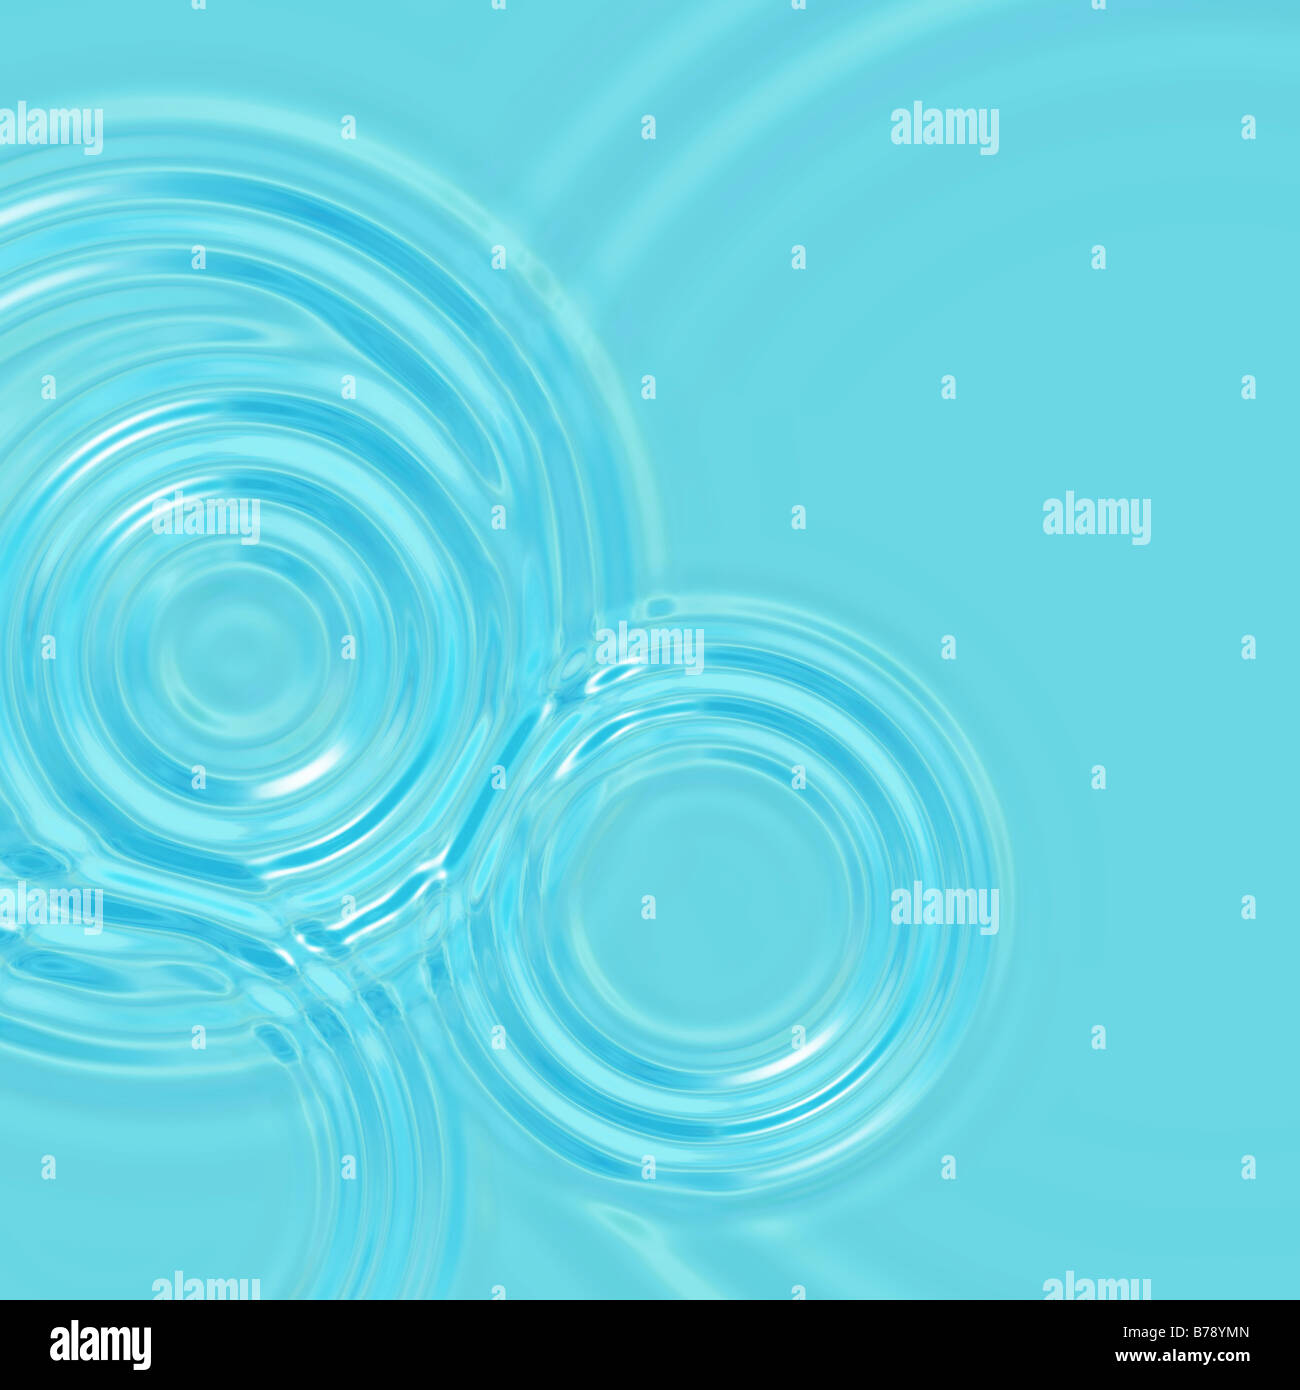 abstract blue water ripple background Stock Photo